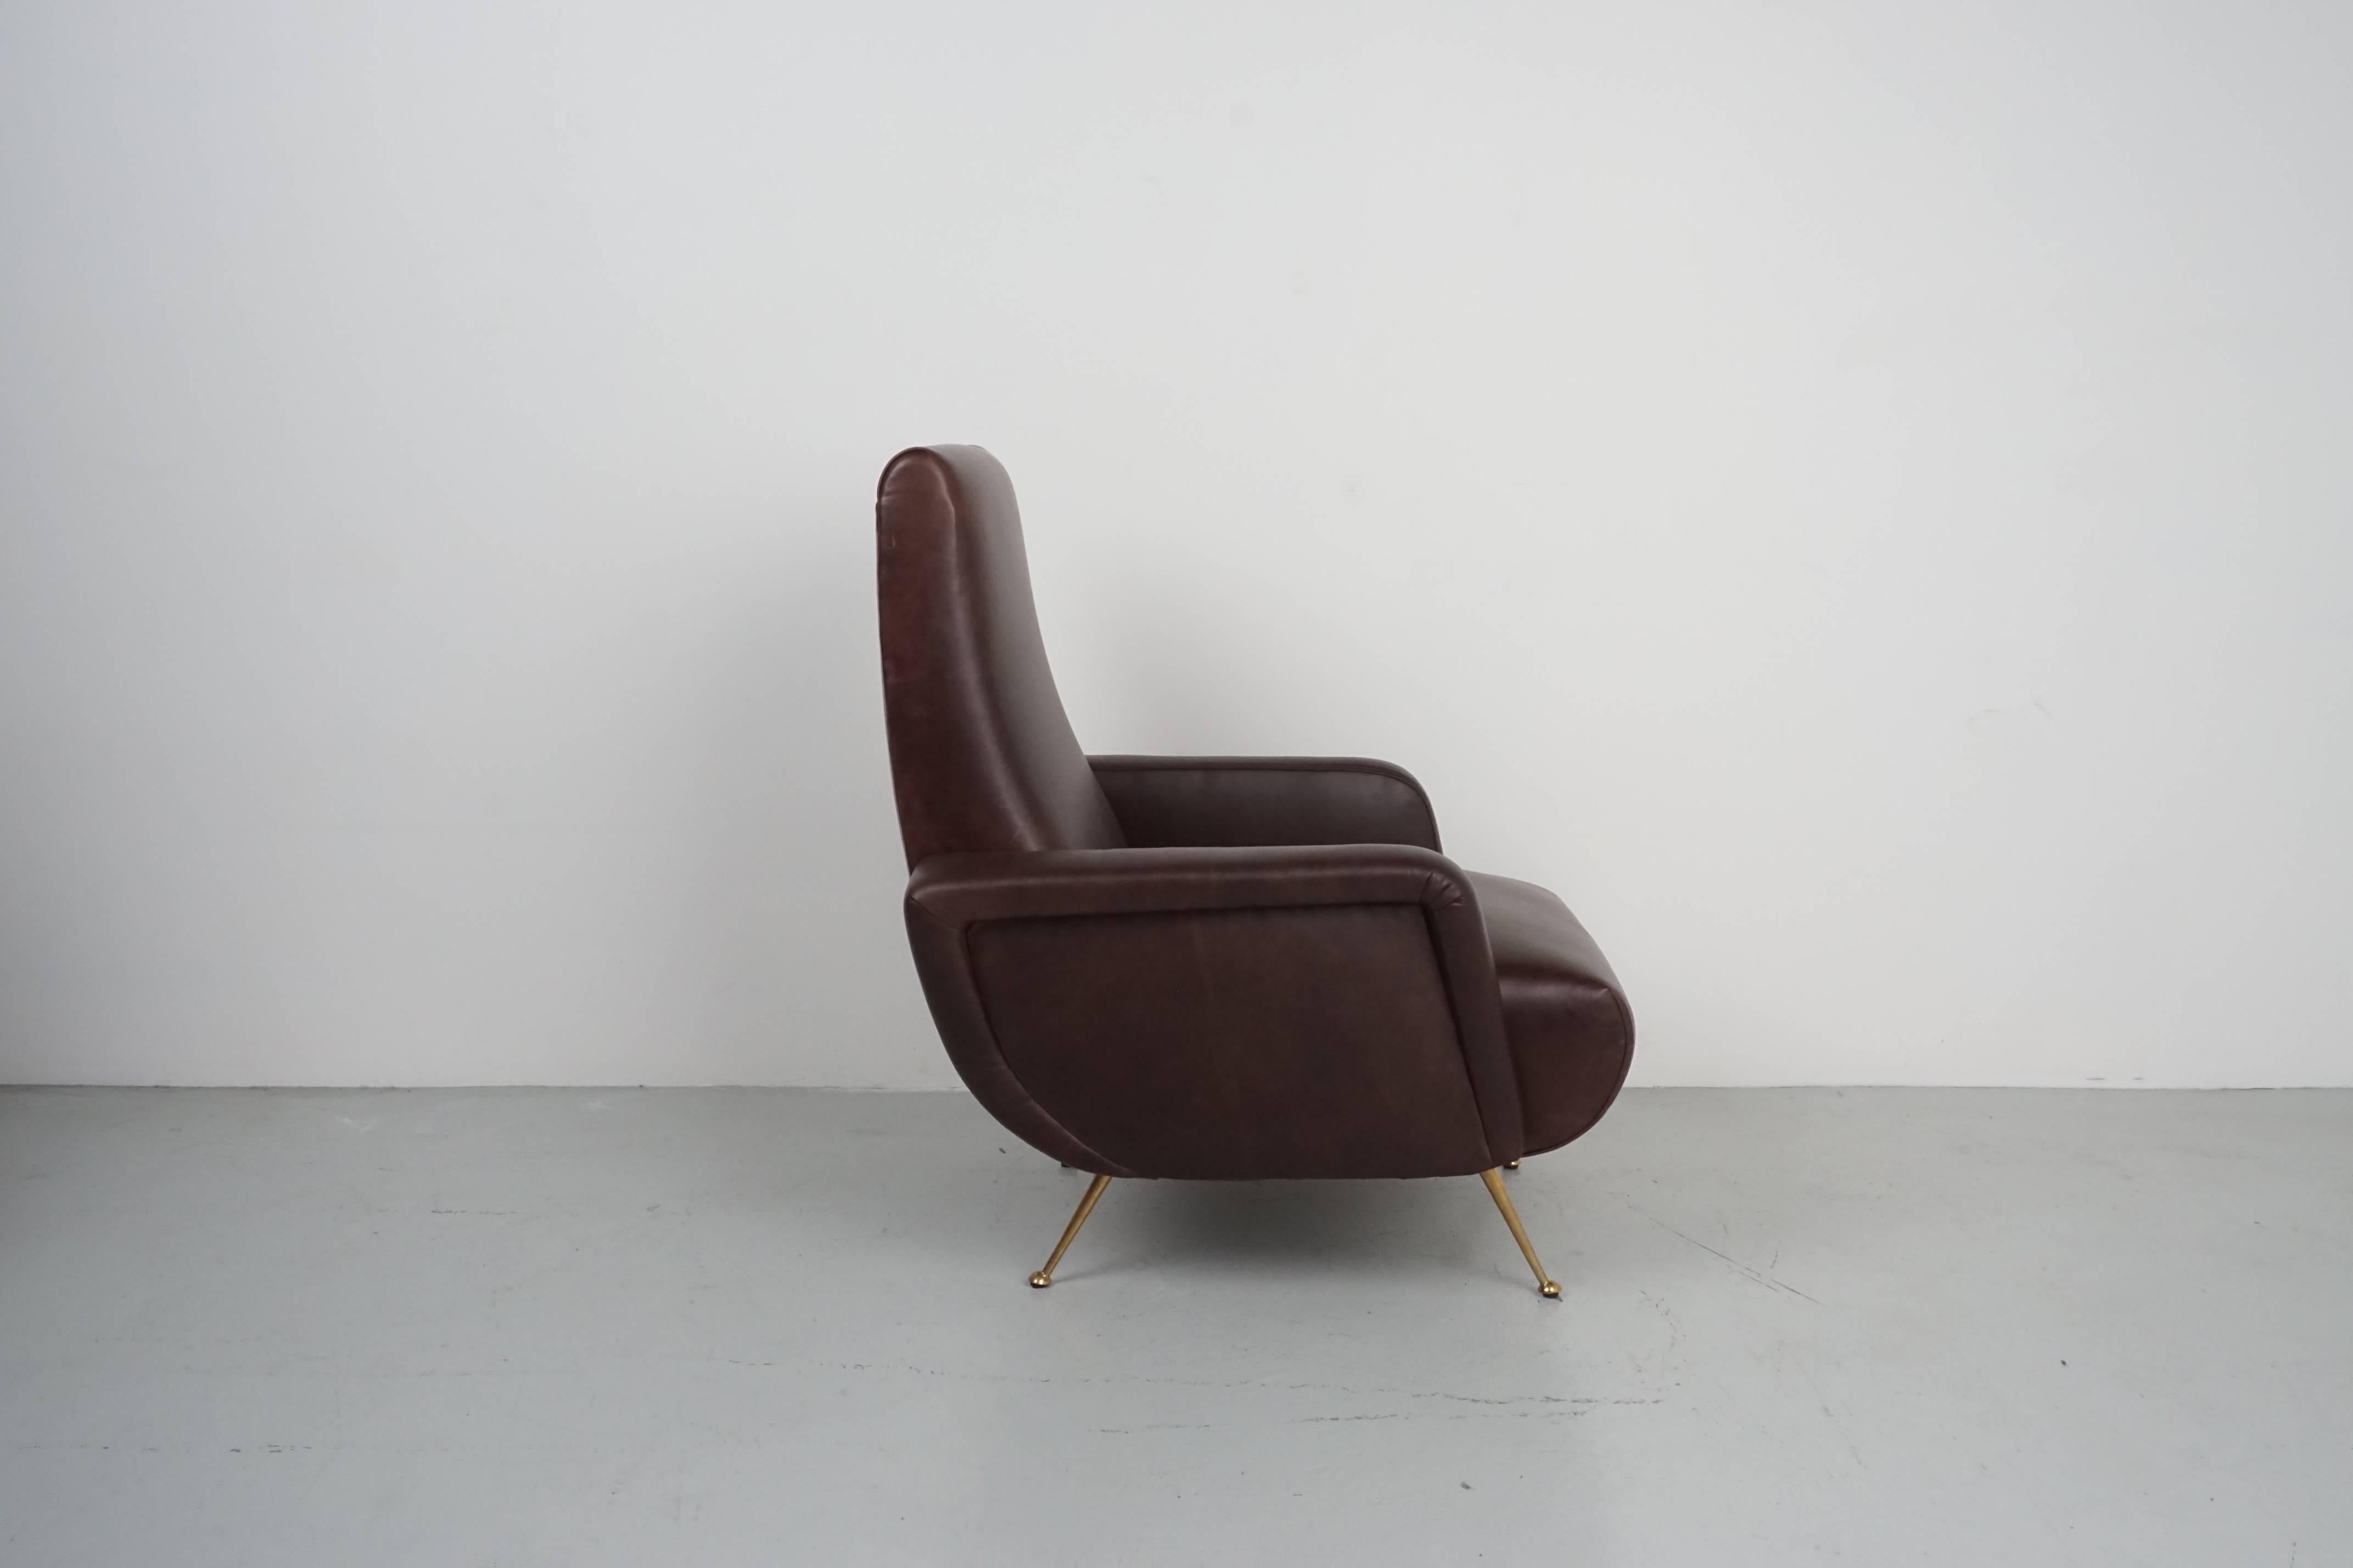 Mid-20th Century Italian Sculptural Leather Chairs